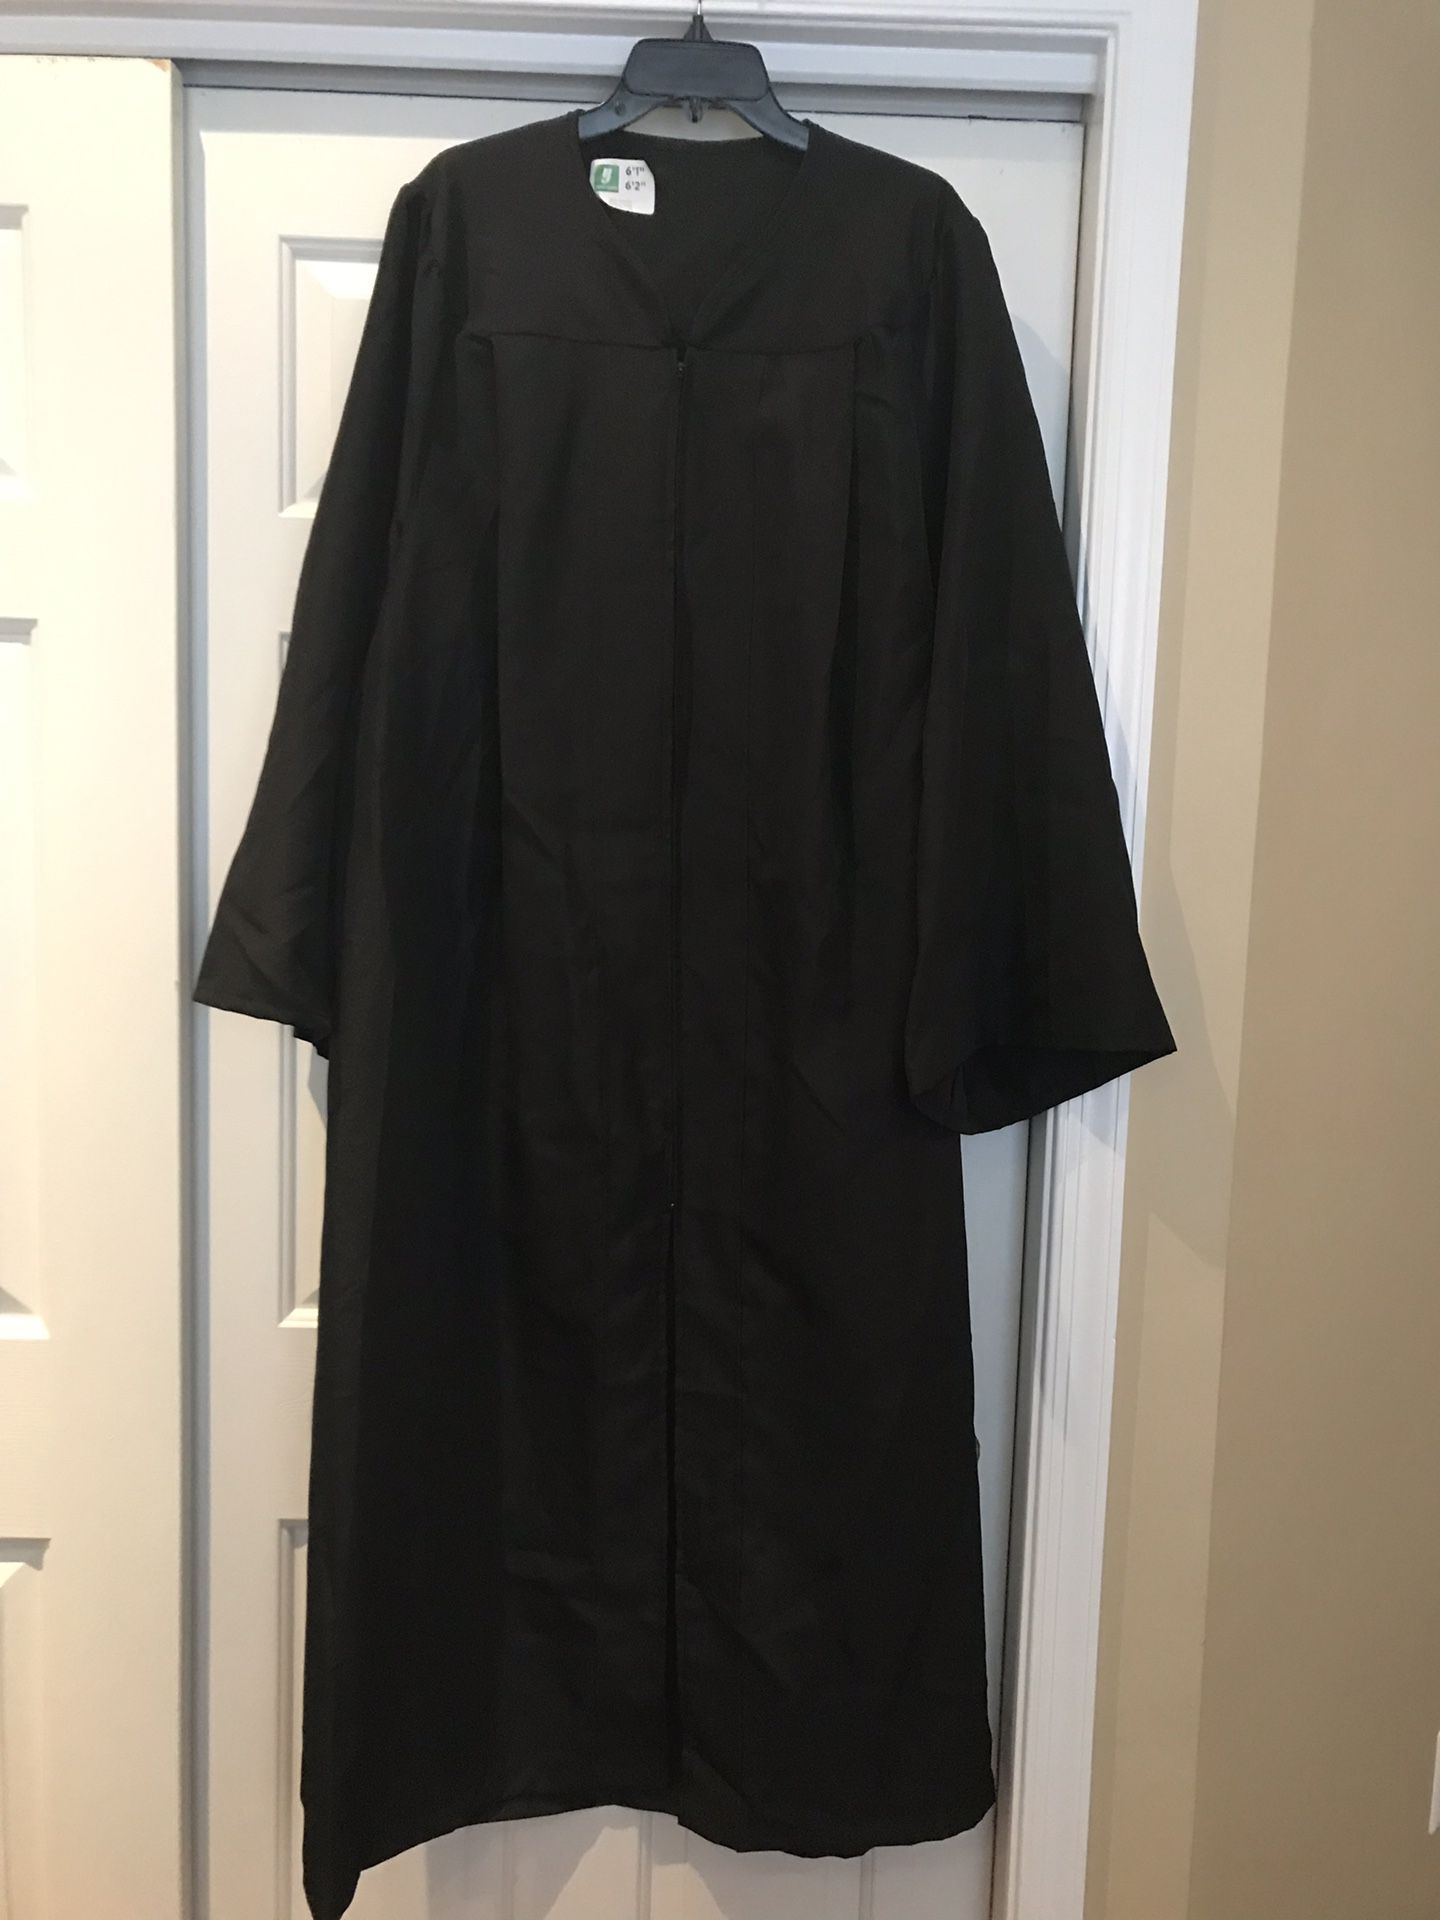 Black graduation gown for 6’1” to 6’2” people